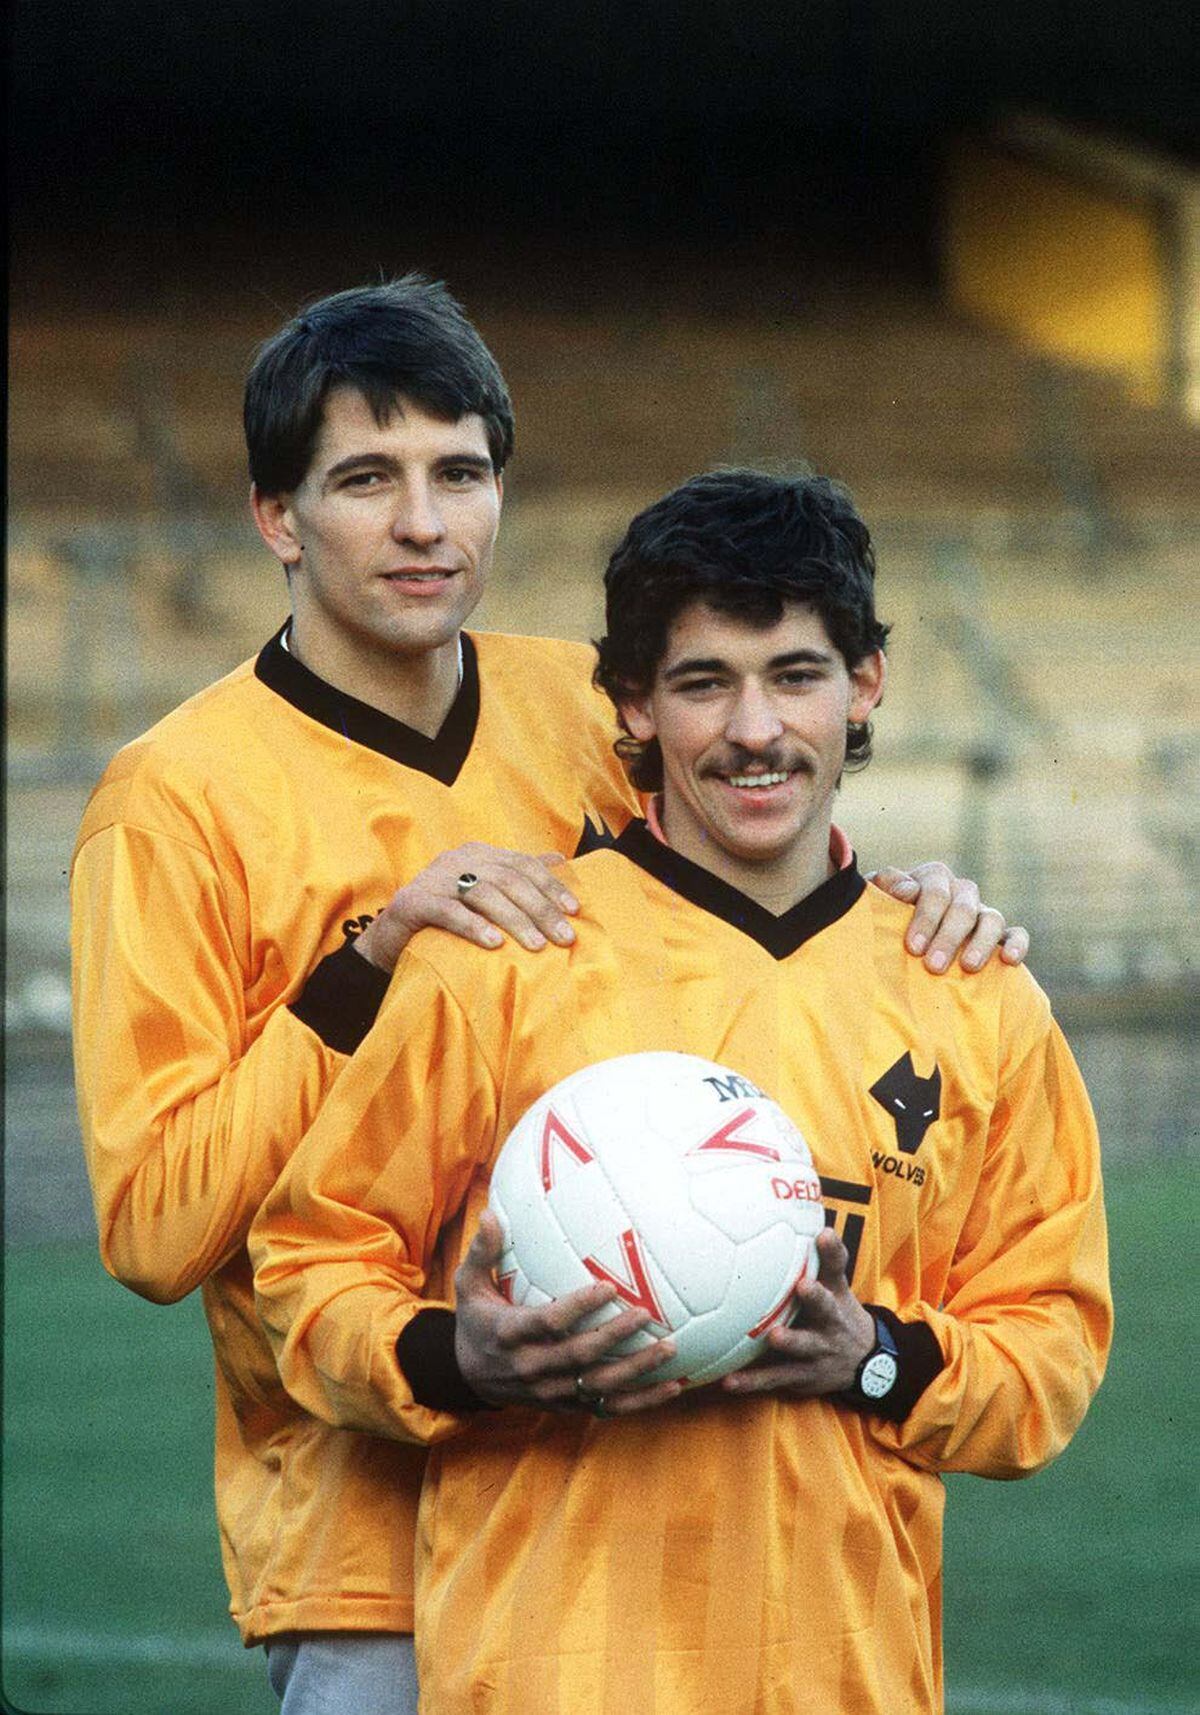 [BULL AND THOMPSON]Caption:STEVE BULL AND ANDY THOMPSON 1986.Byline:Macintosh HDCredit:WRIGHTObject name:BULL AND THOMPSONCategory:Caption writer:8BIMOriginal transmission reference:279Special instructions:FOR STEVE GORDOS......City:WOLVERHAMPTONOriginating Program:8BIMDate:29/6/96Time:1:46:39 pm